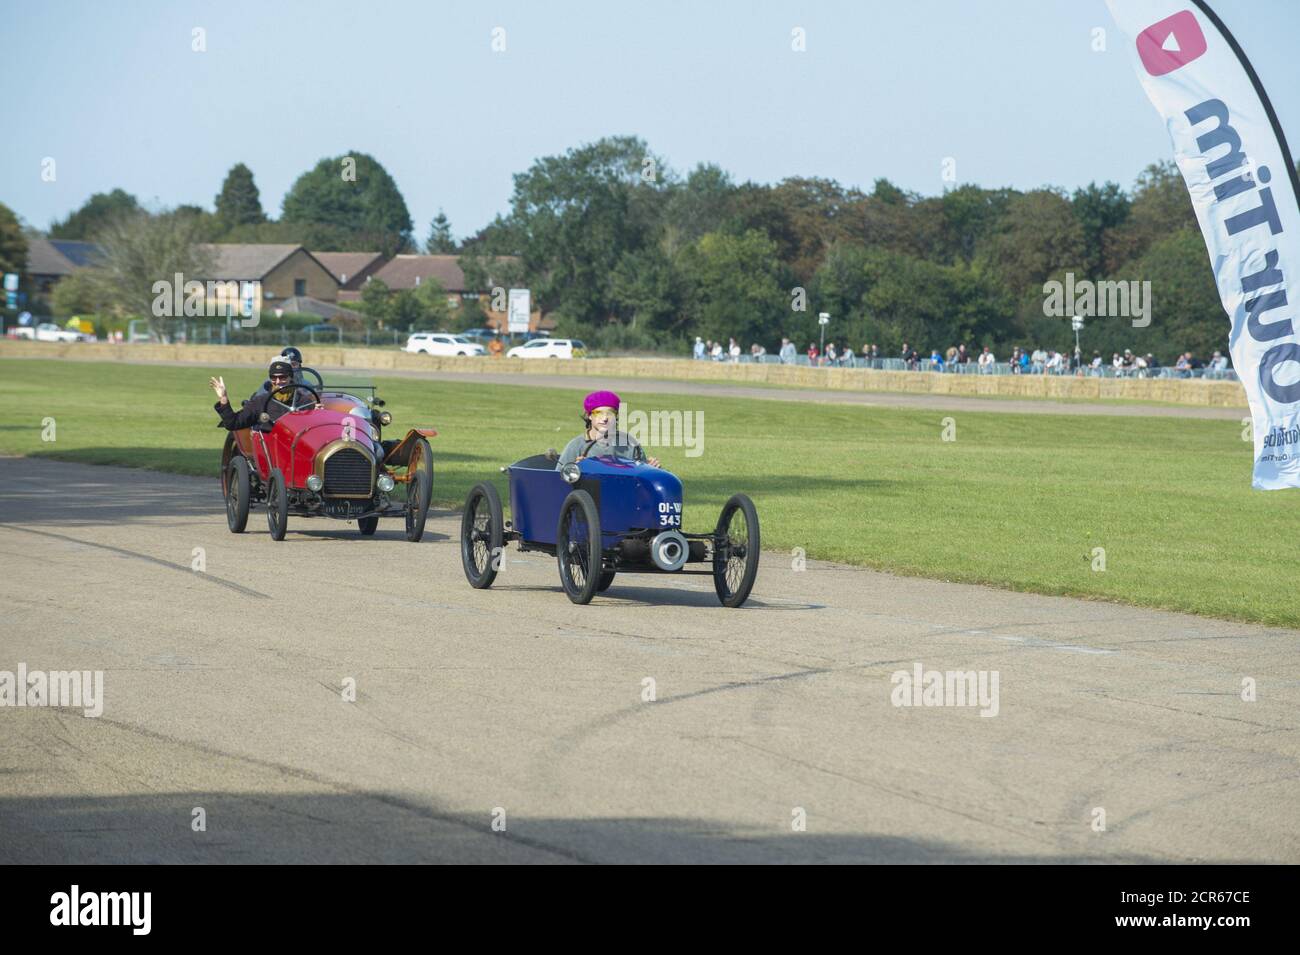 Bicester, UK. 19th Sep, 2020. Classic car drive gets under way for day two of the new social distanced format, event has complied to with new guidelines for events, public are enjoying event and keeping to new rules. The event has displays of classic cars and modern cars as well displays and races on track. Terry Scott/SPP Credit: SPP Sport Press Photo. /Alamy Live News Stock Photo